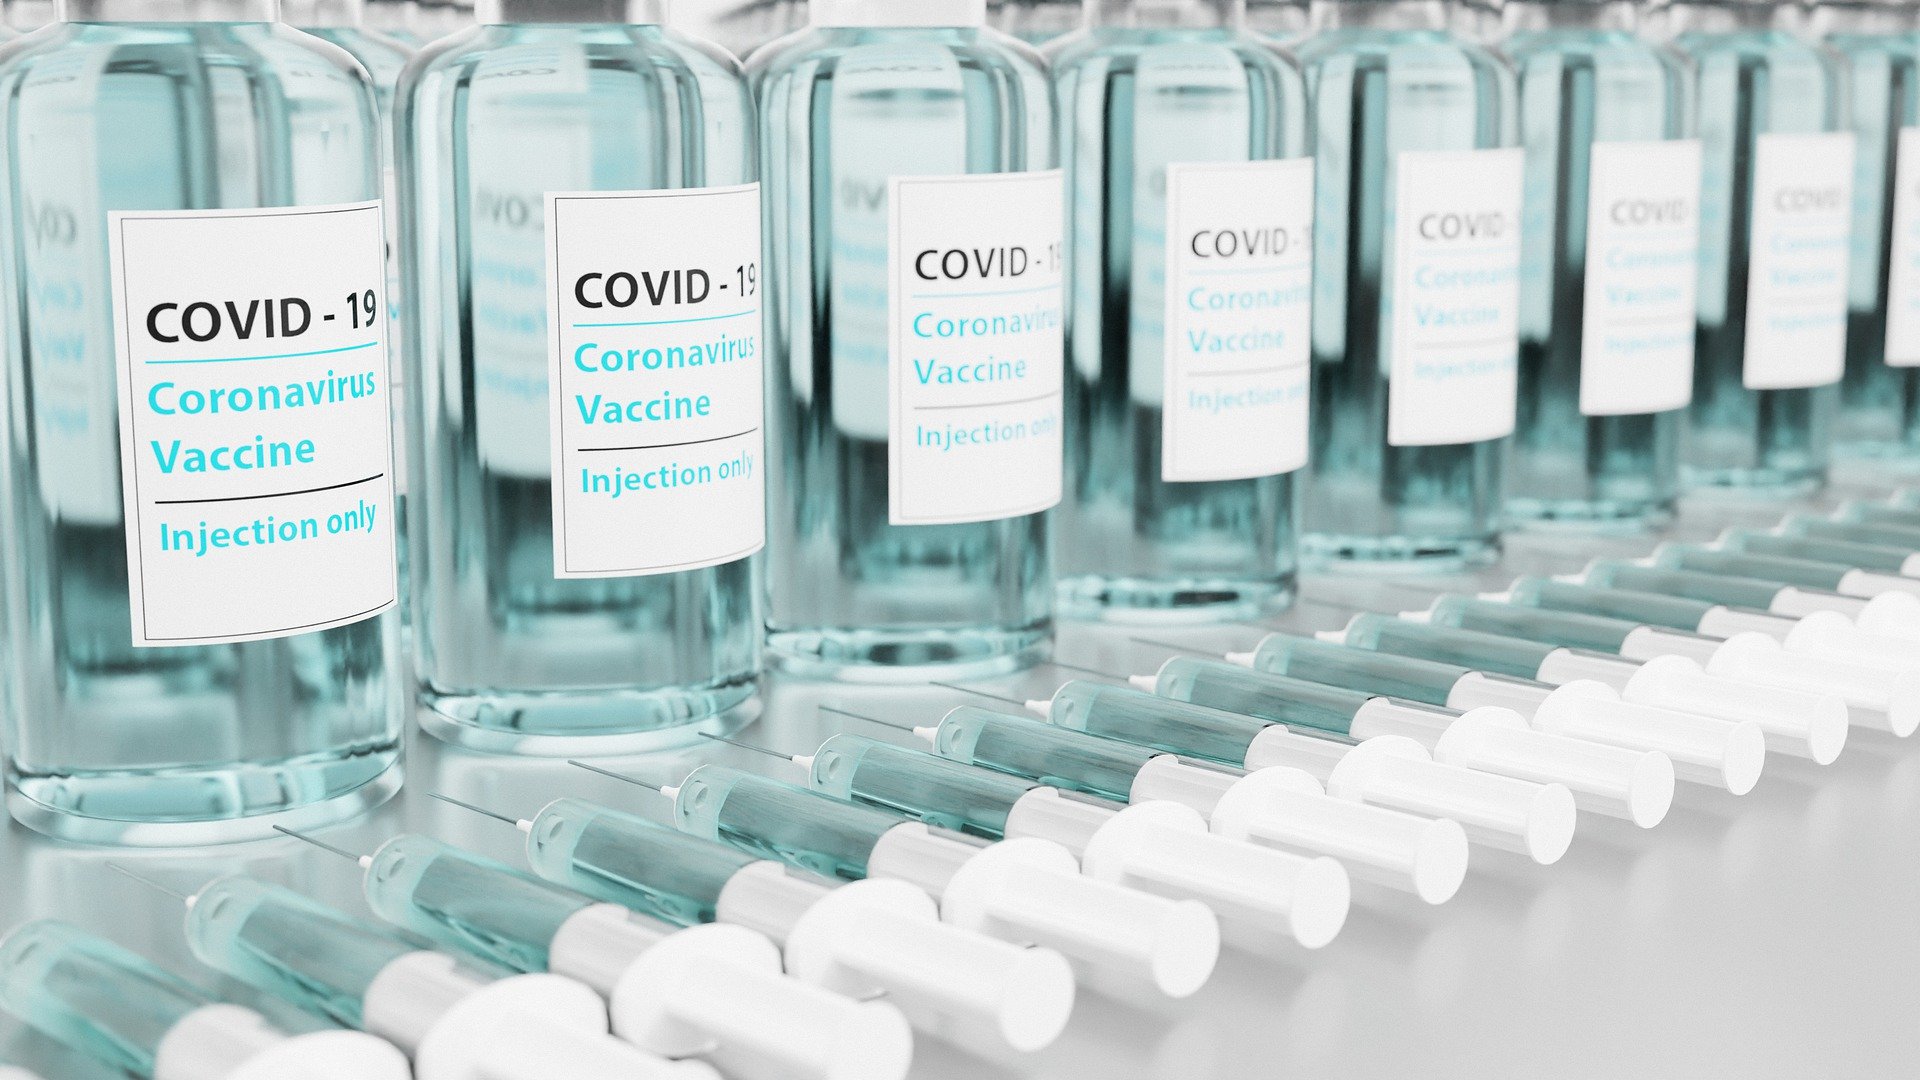 COVID-19 - COVAX distributes 28.3 million doses of vaccine to over 46 countries